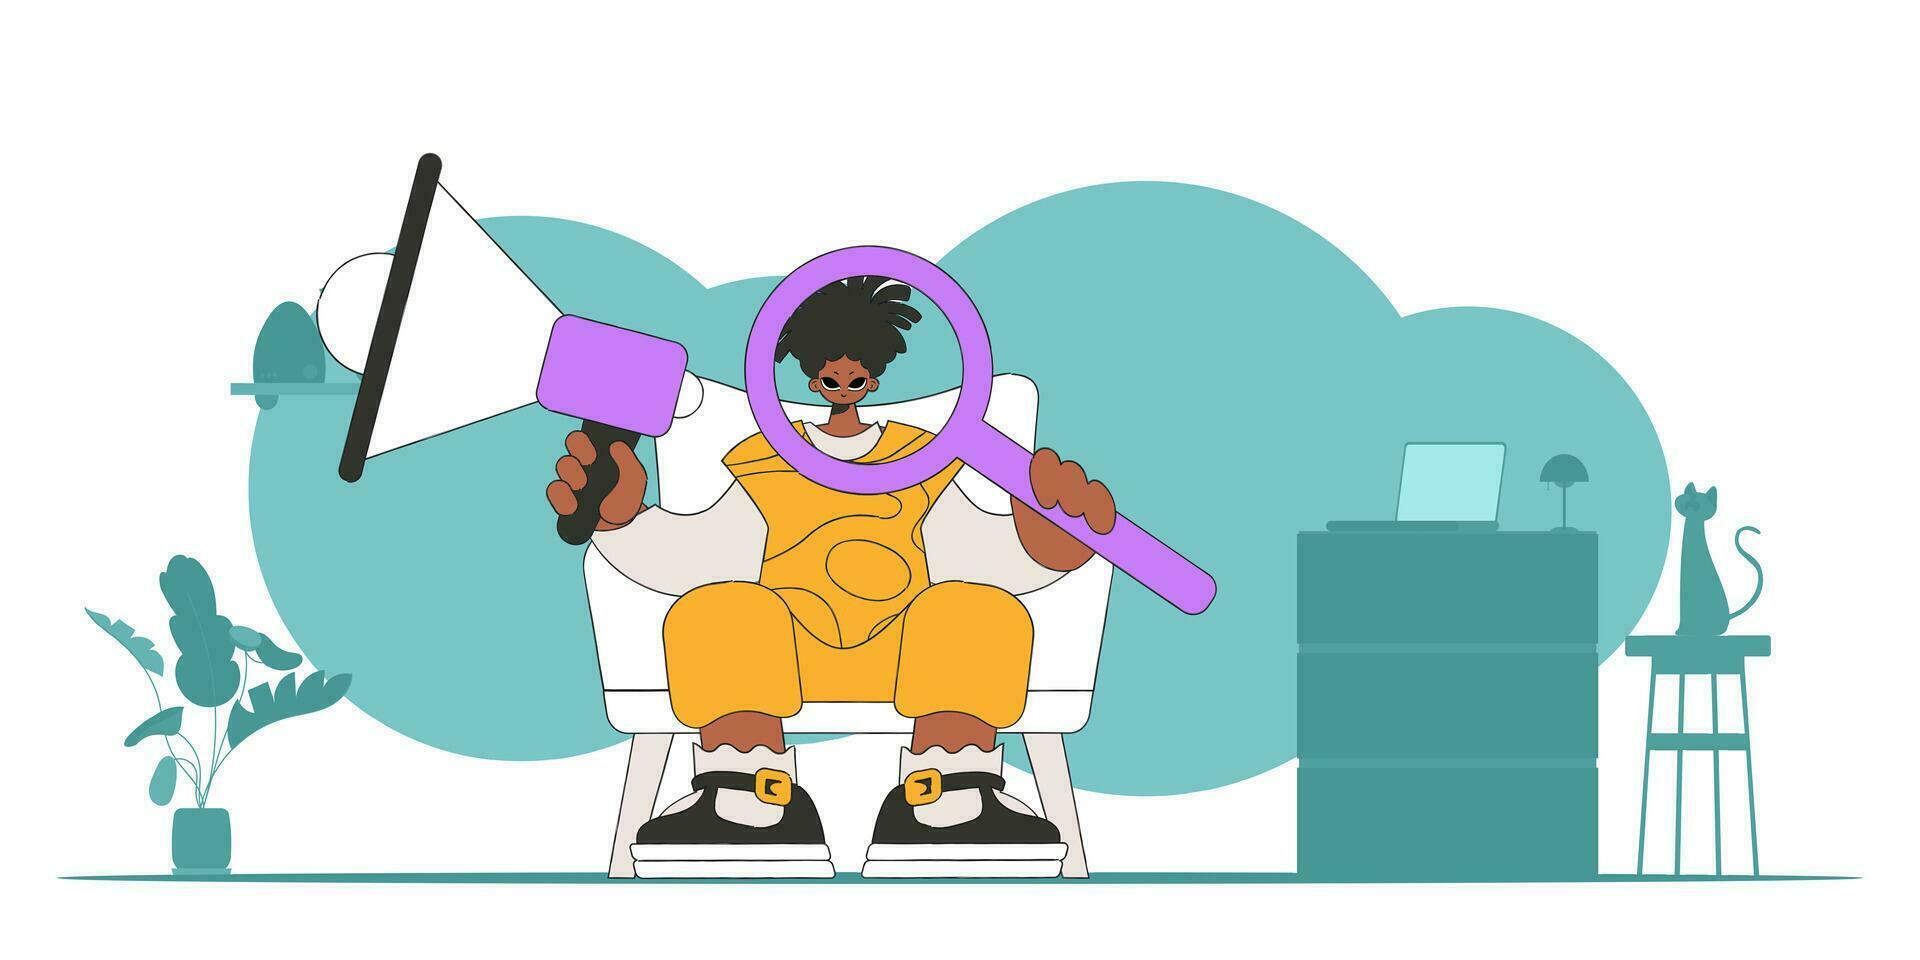 Stylized vector illustration of a HR representative. A young man sits in a chair and holds a megaphone in his hand.